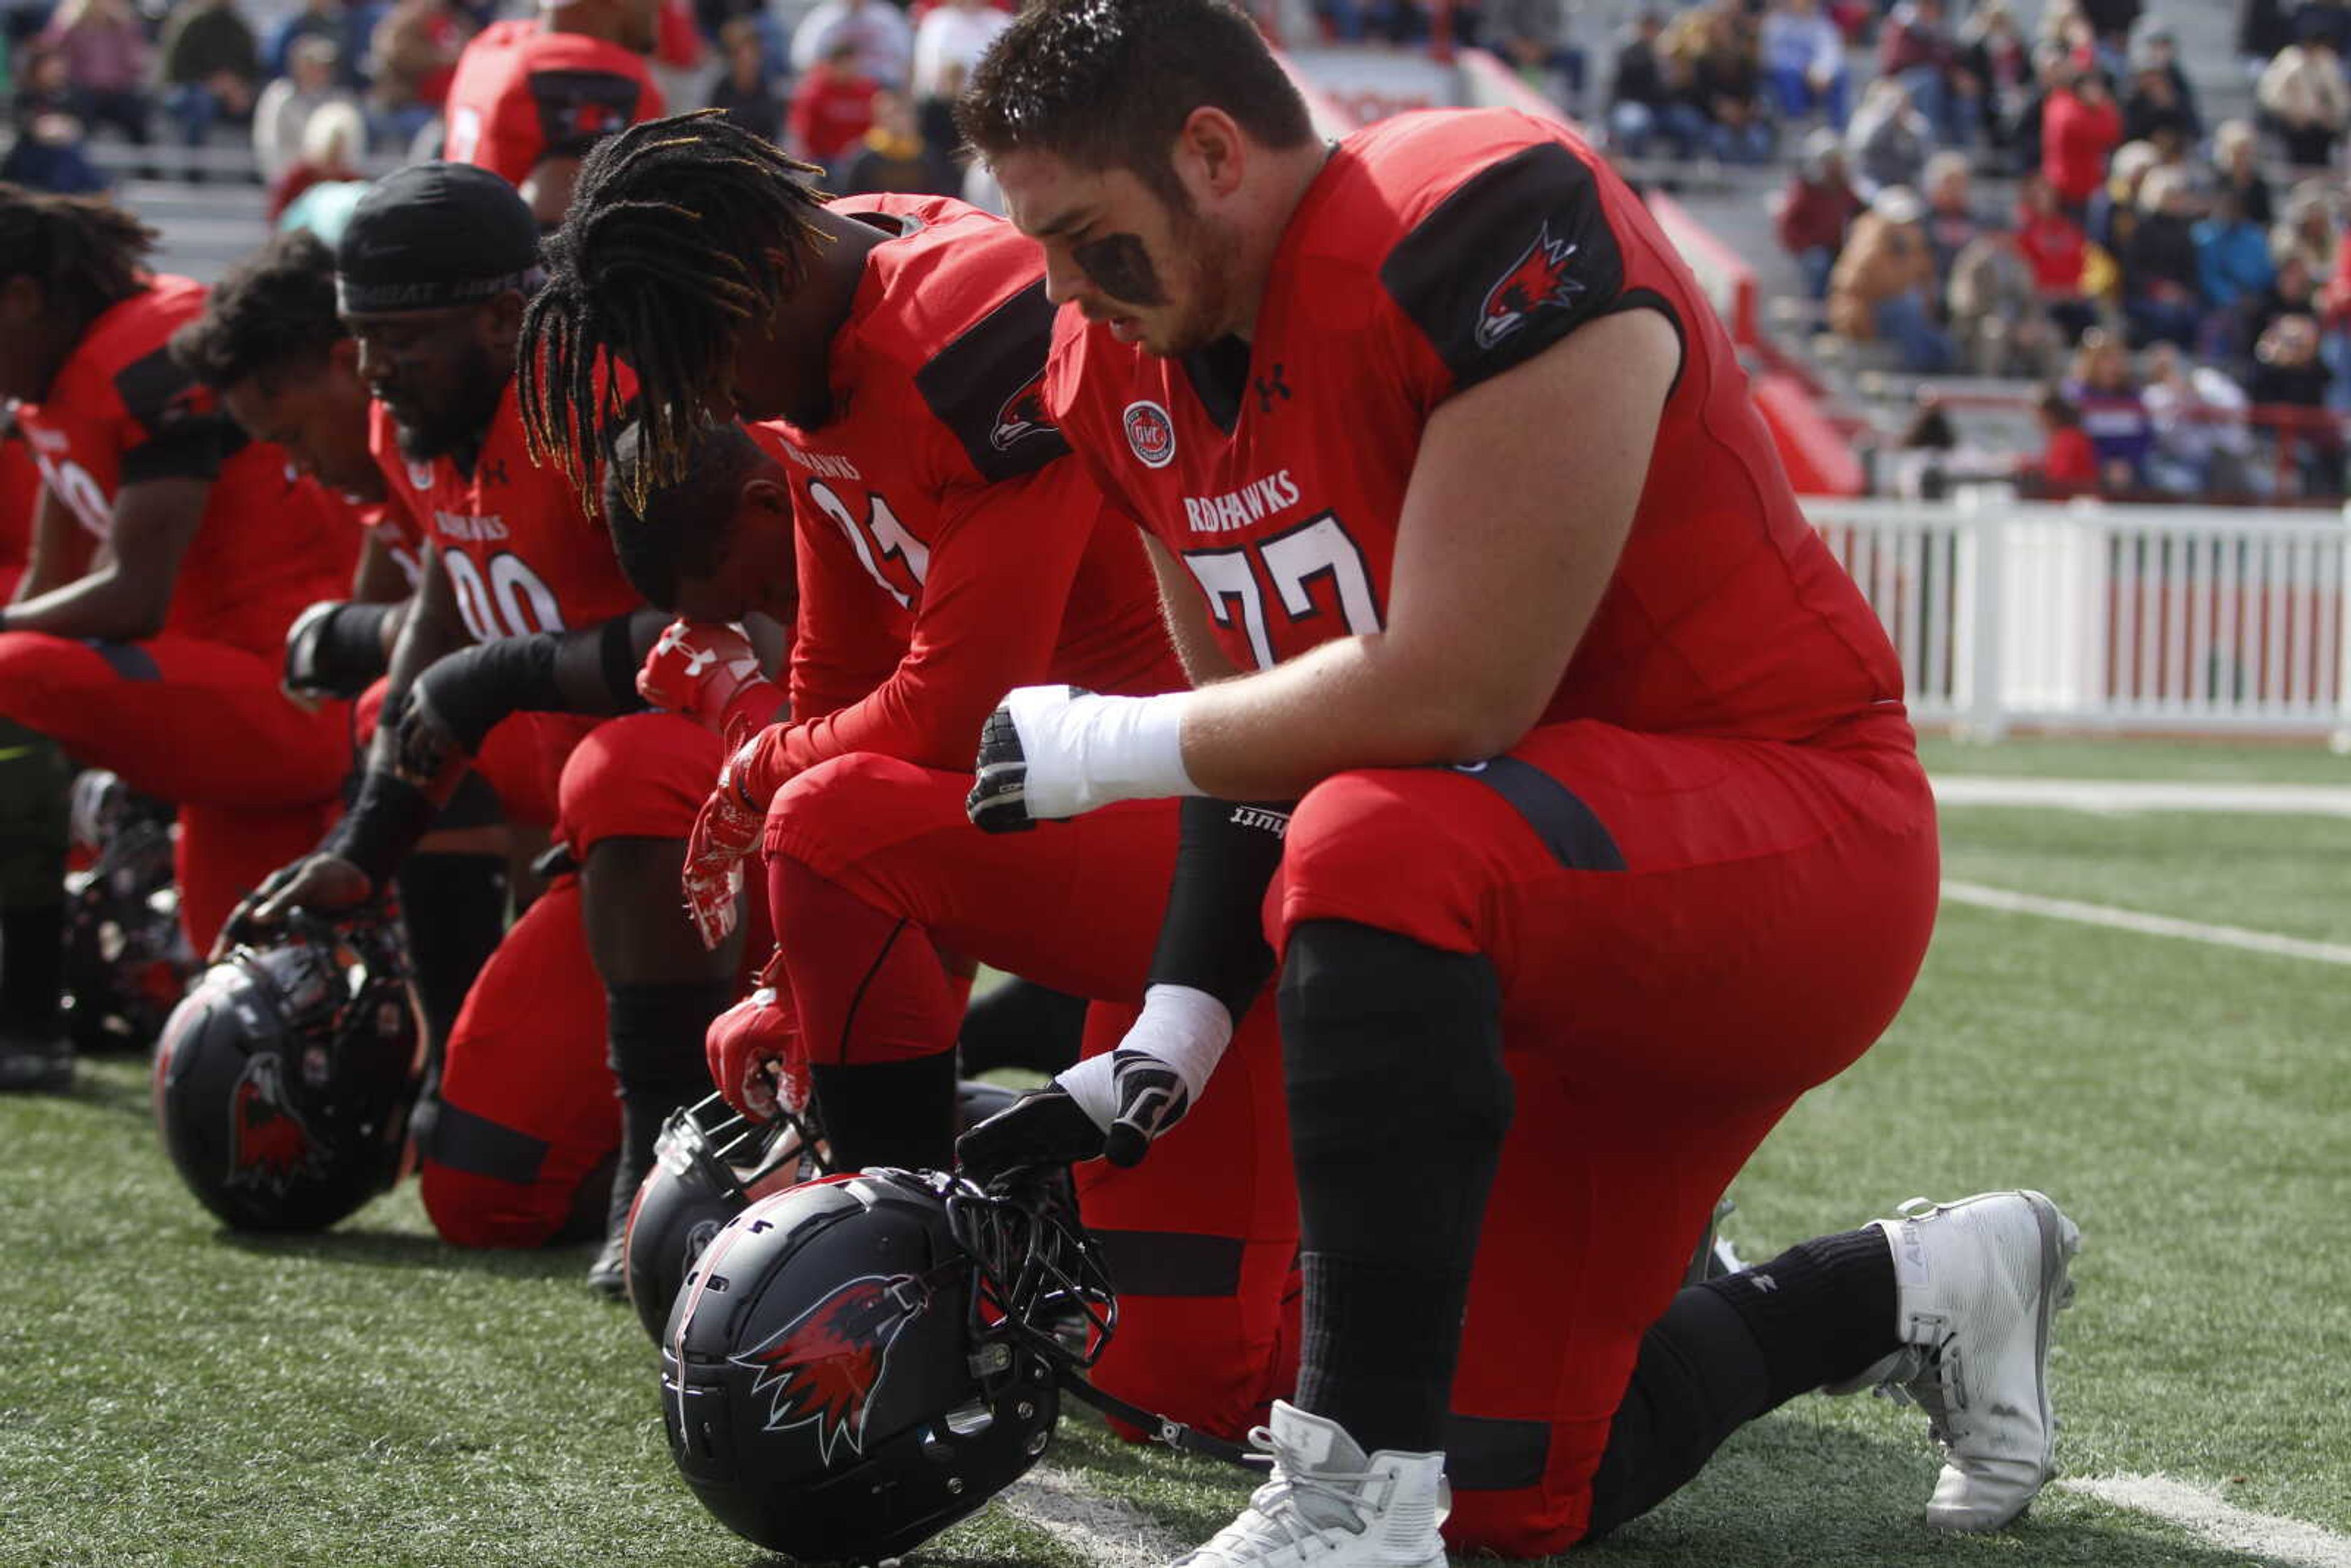 Several Redhawks take a knee prior to the start of the game against Tennessee State on Nov. 3, including junior offensive lineman Elijah Swehla (right).